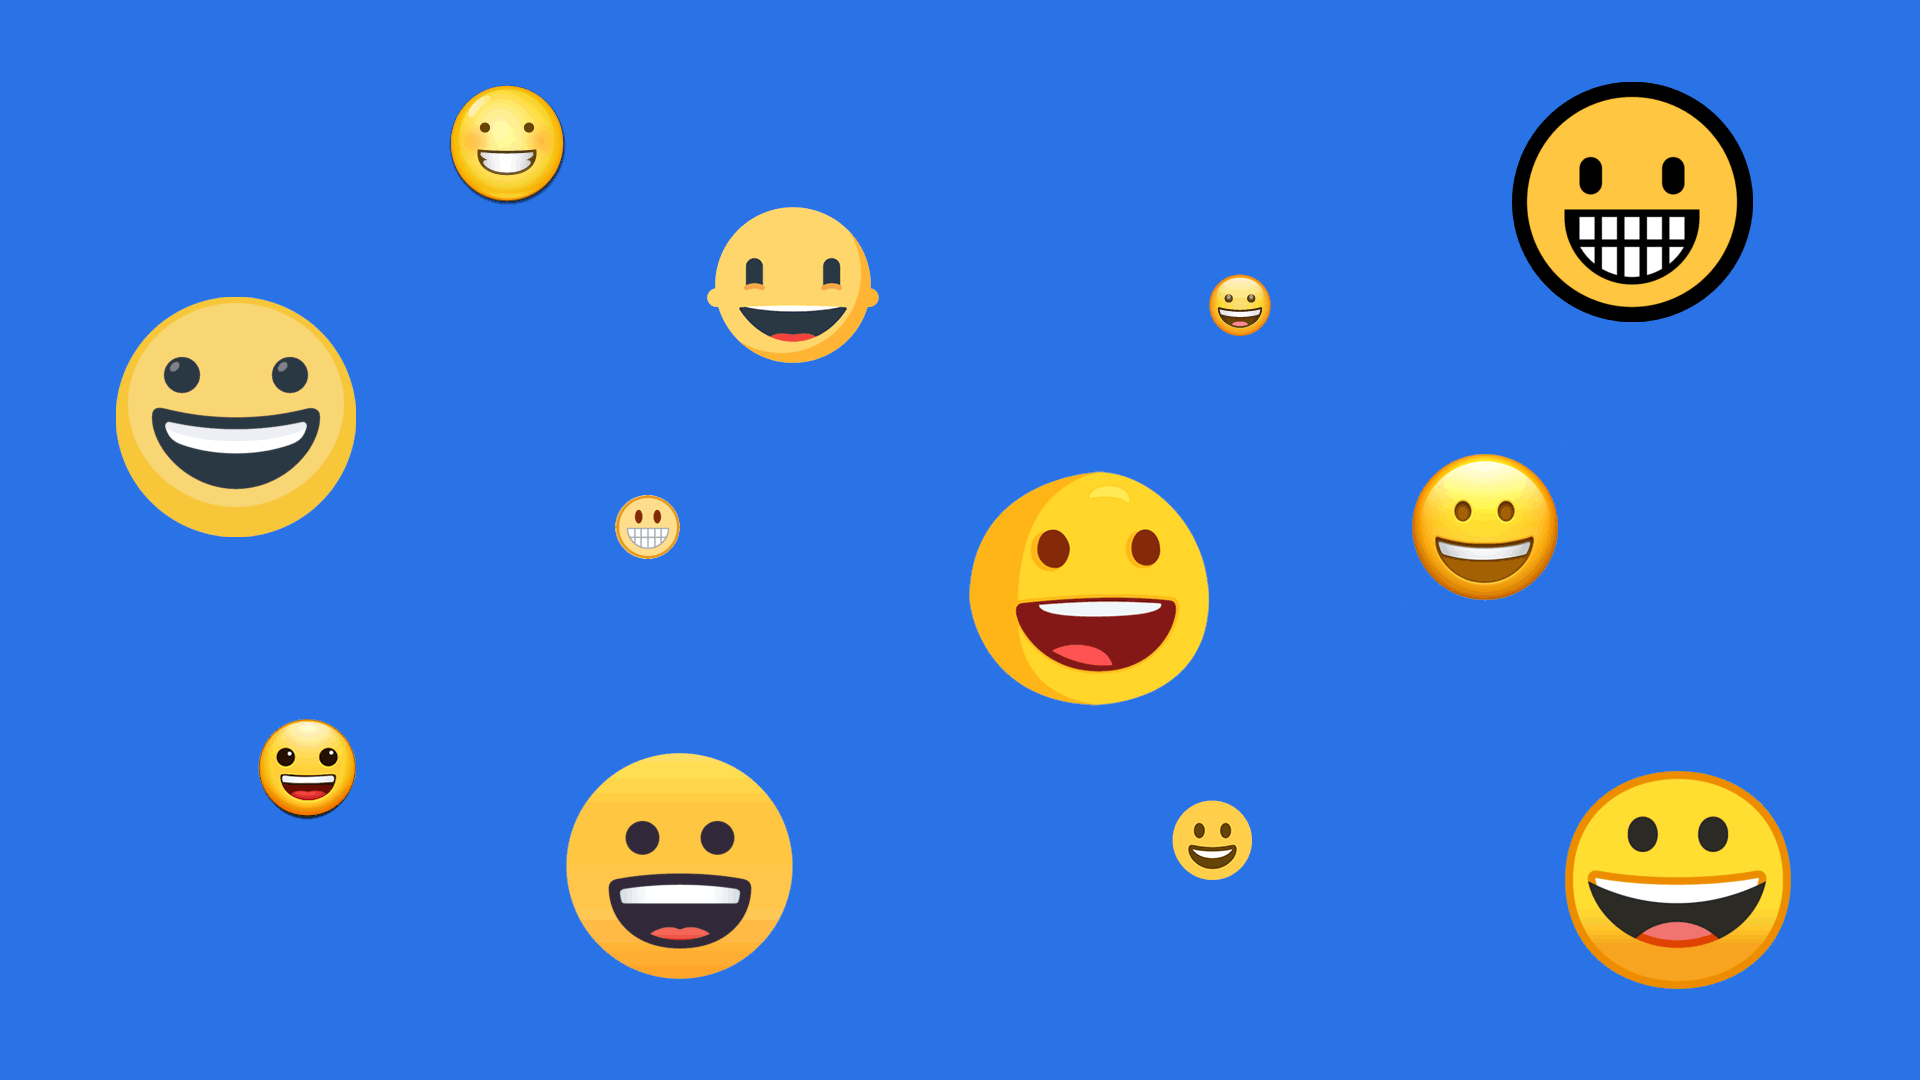 Gif of smiling faces